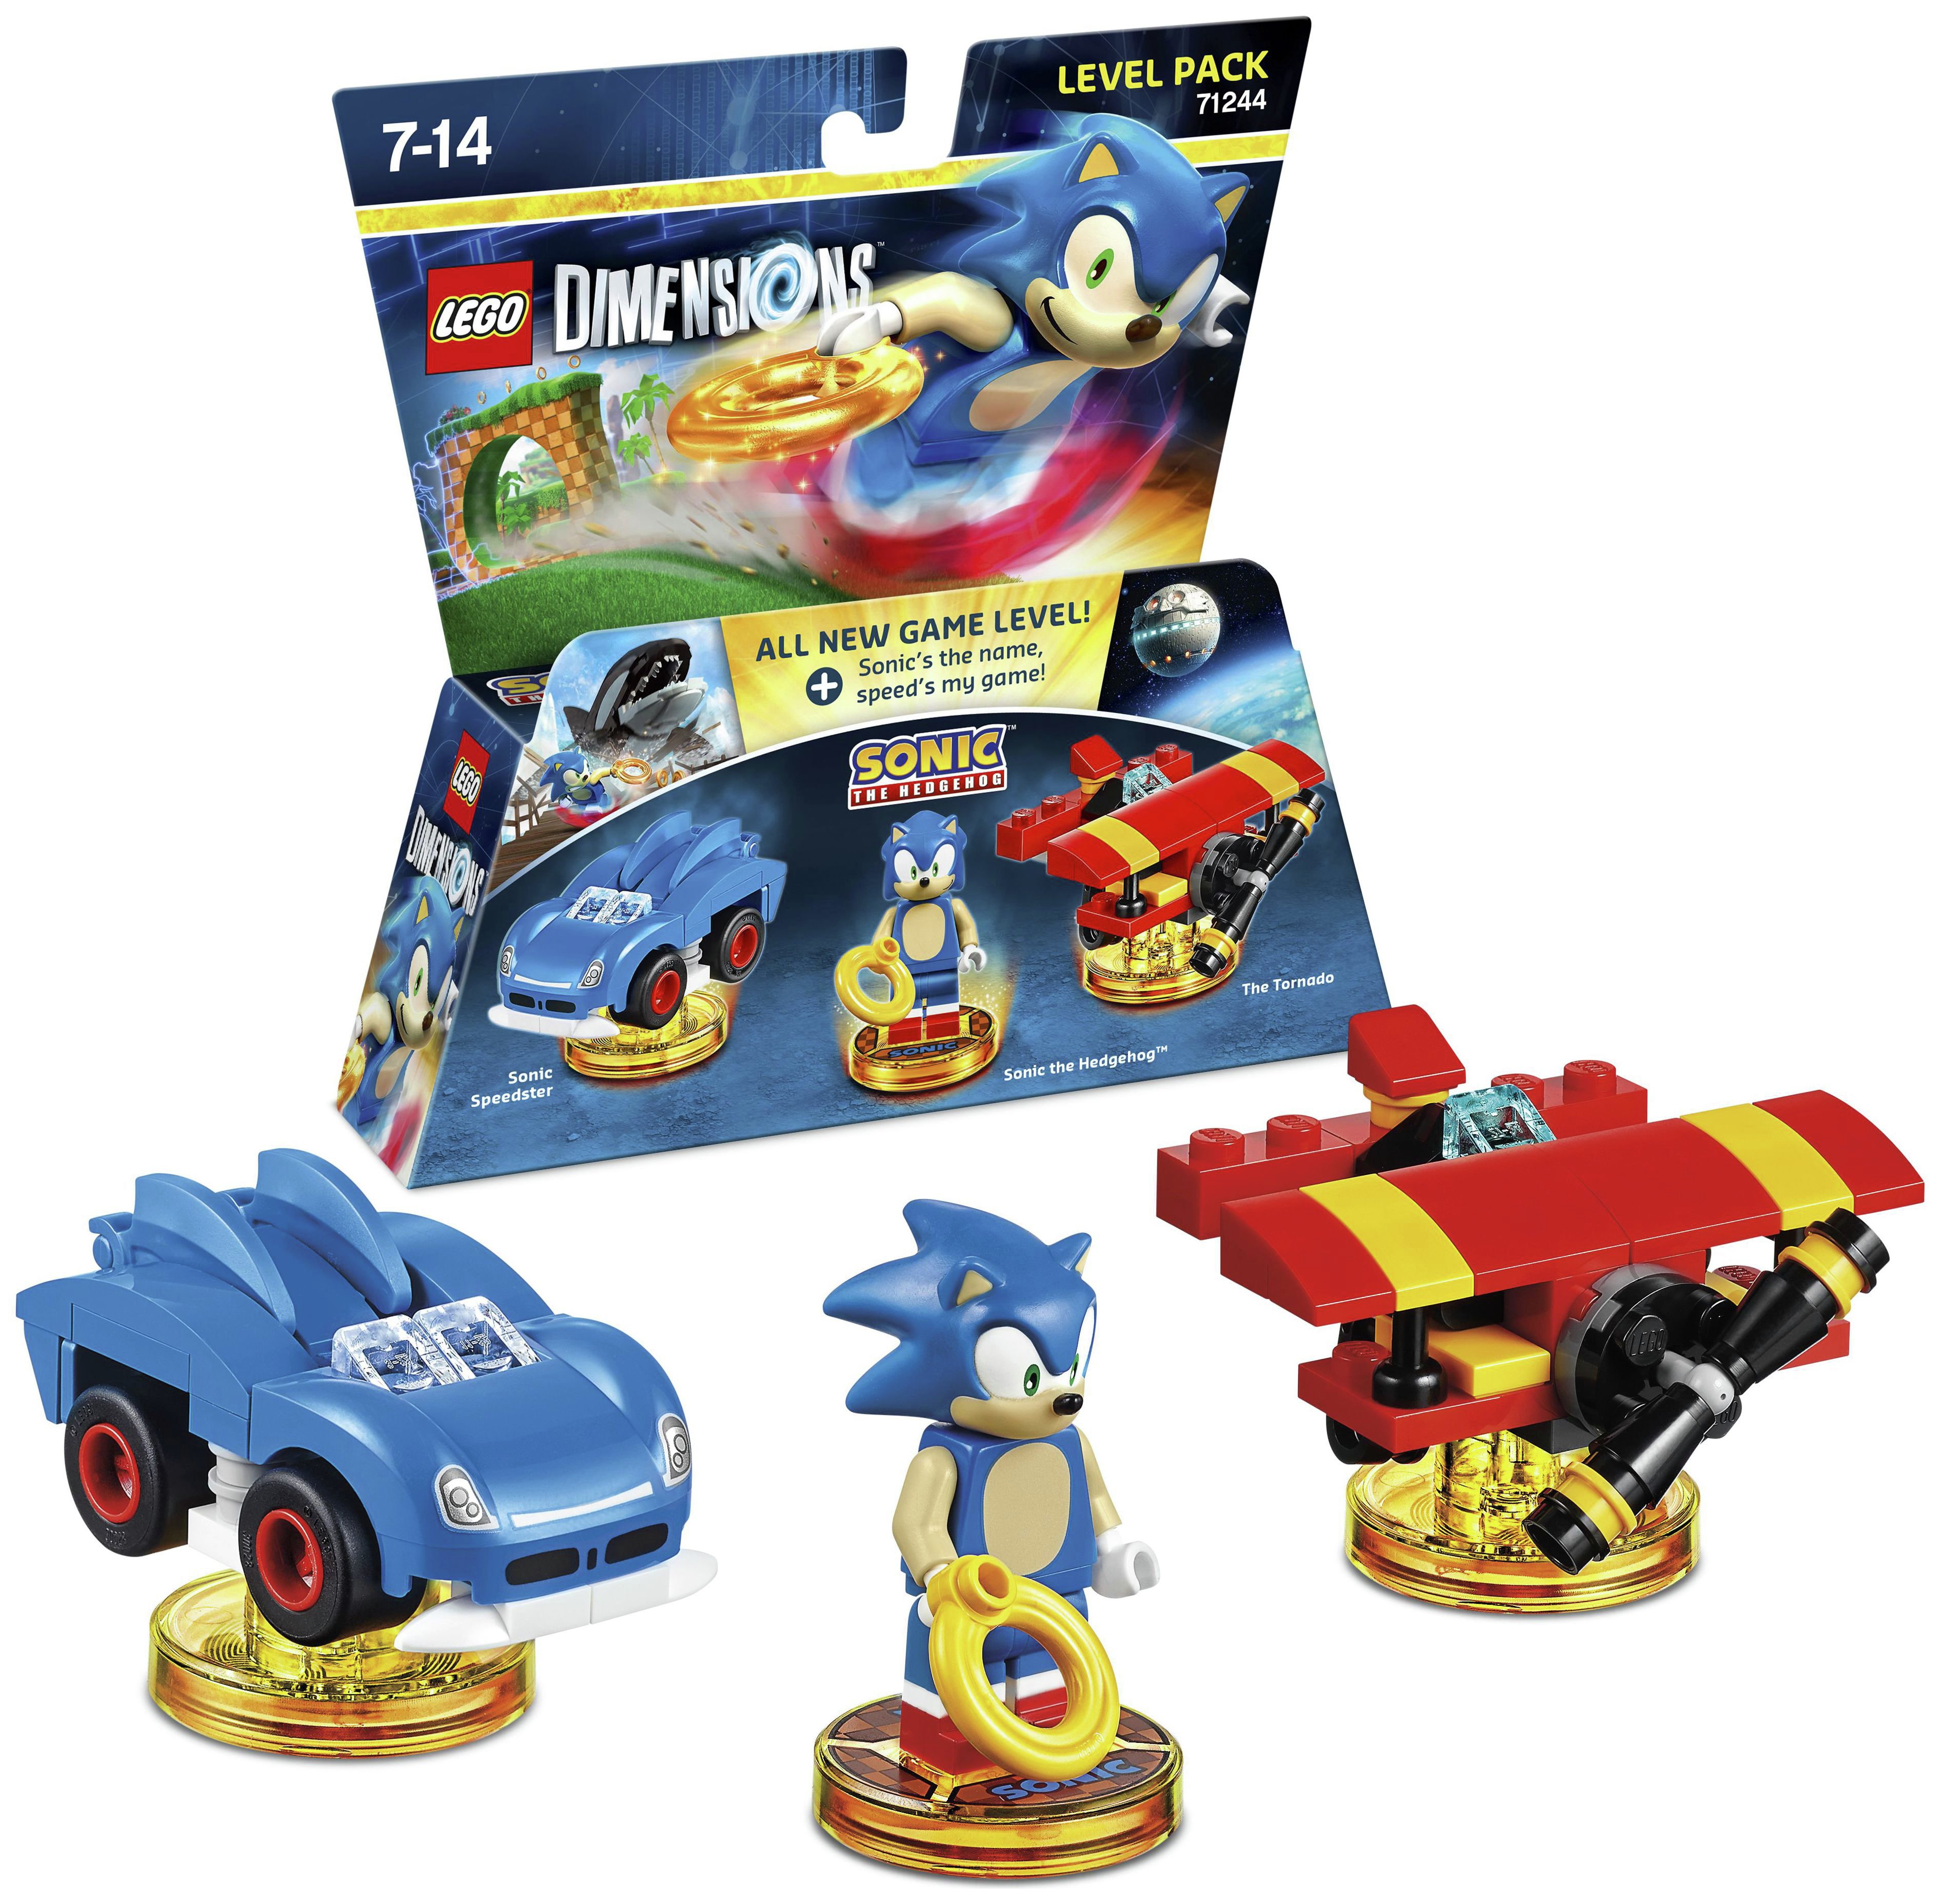 LEGO Dimensions Sonic Level Pack